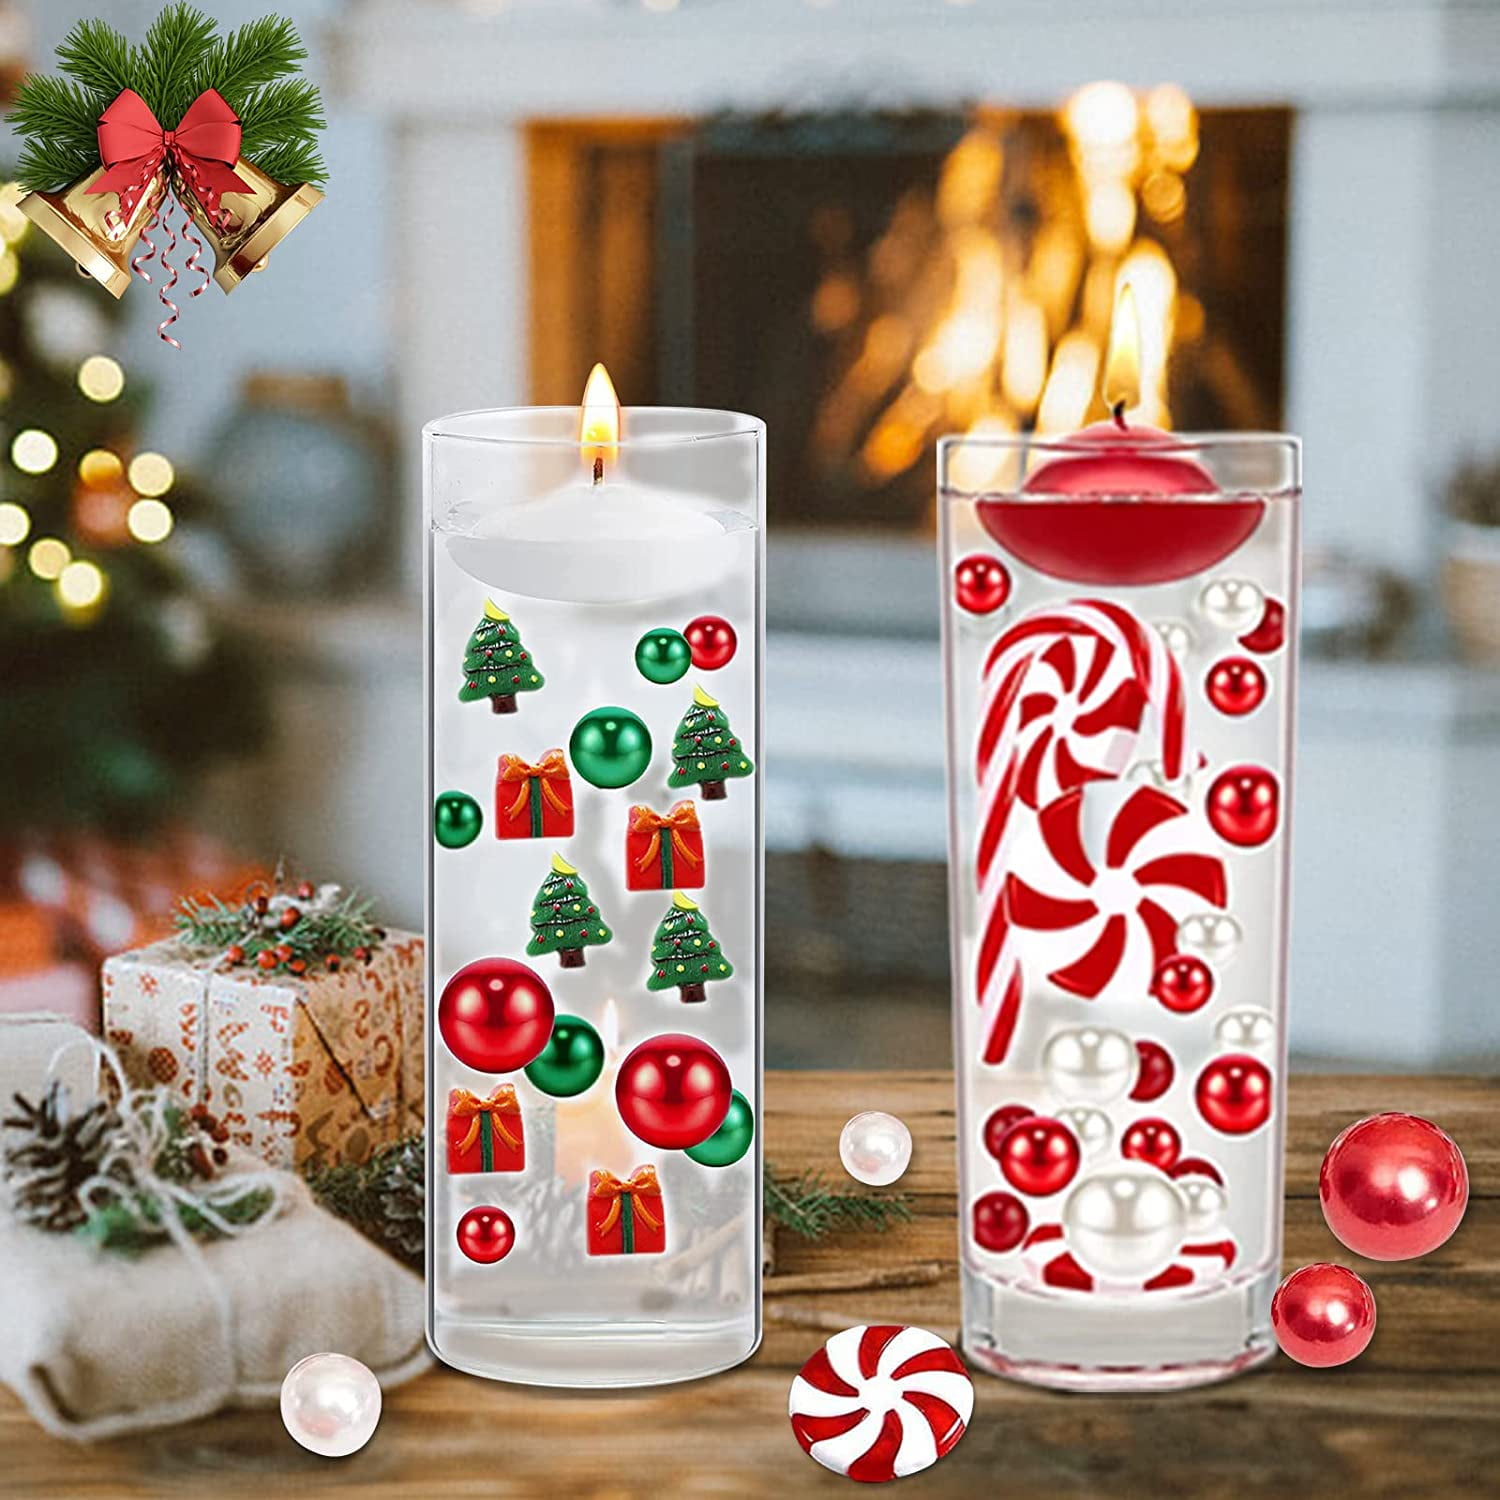 10042 Pcs Christmas Vase Fillers Floating Pearls Candles and Candy